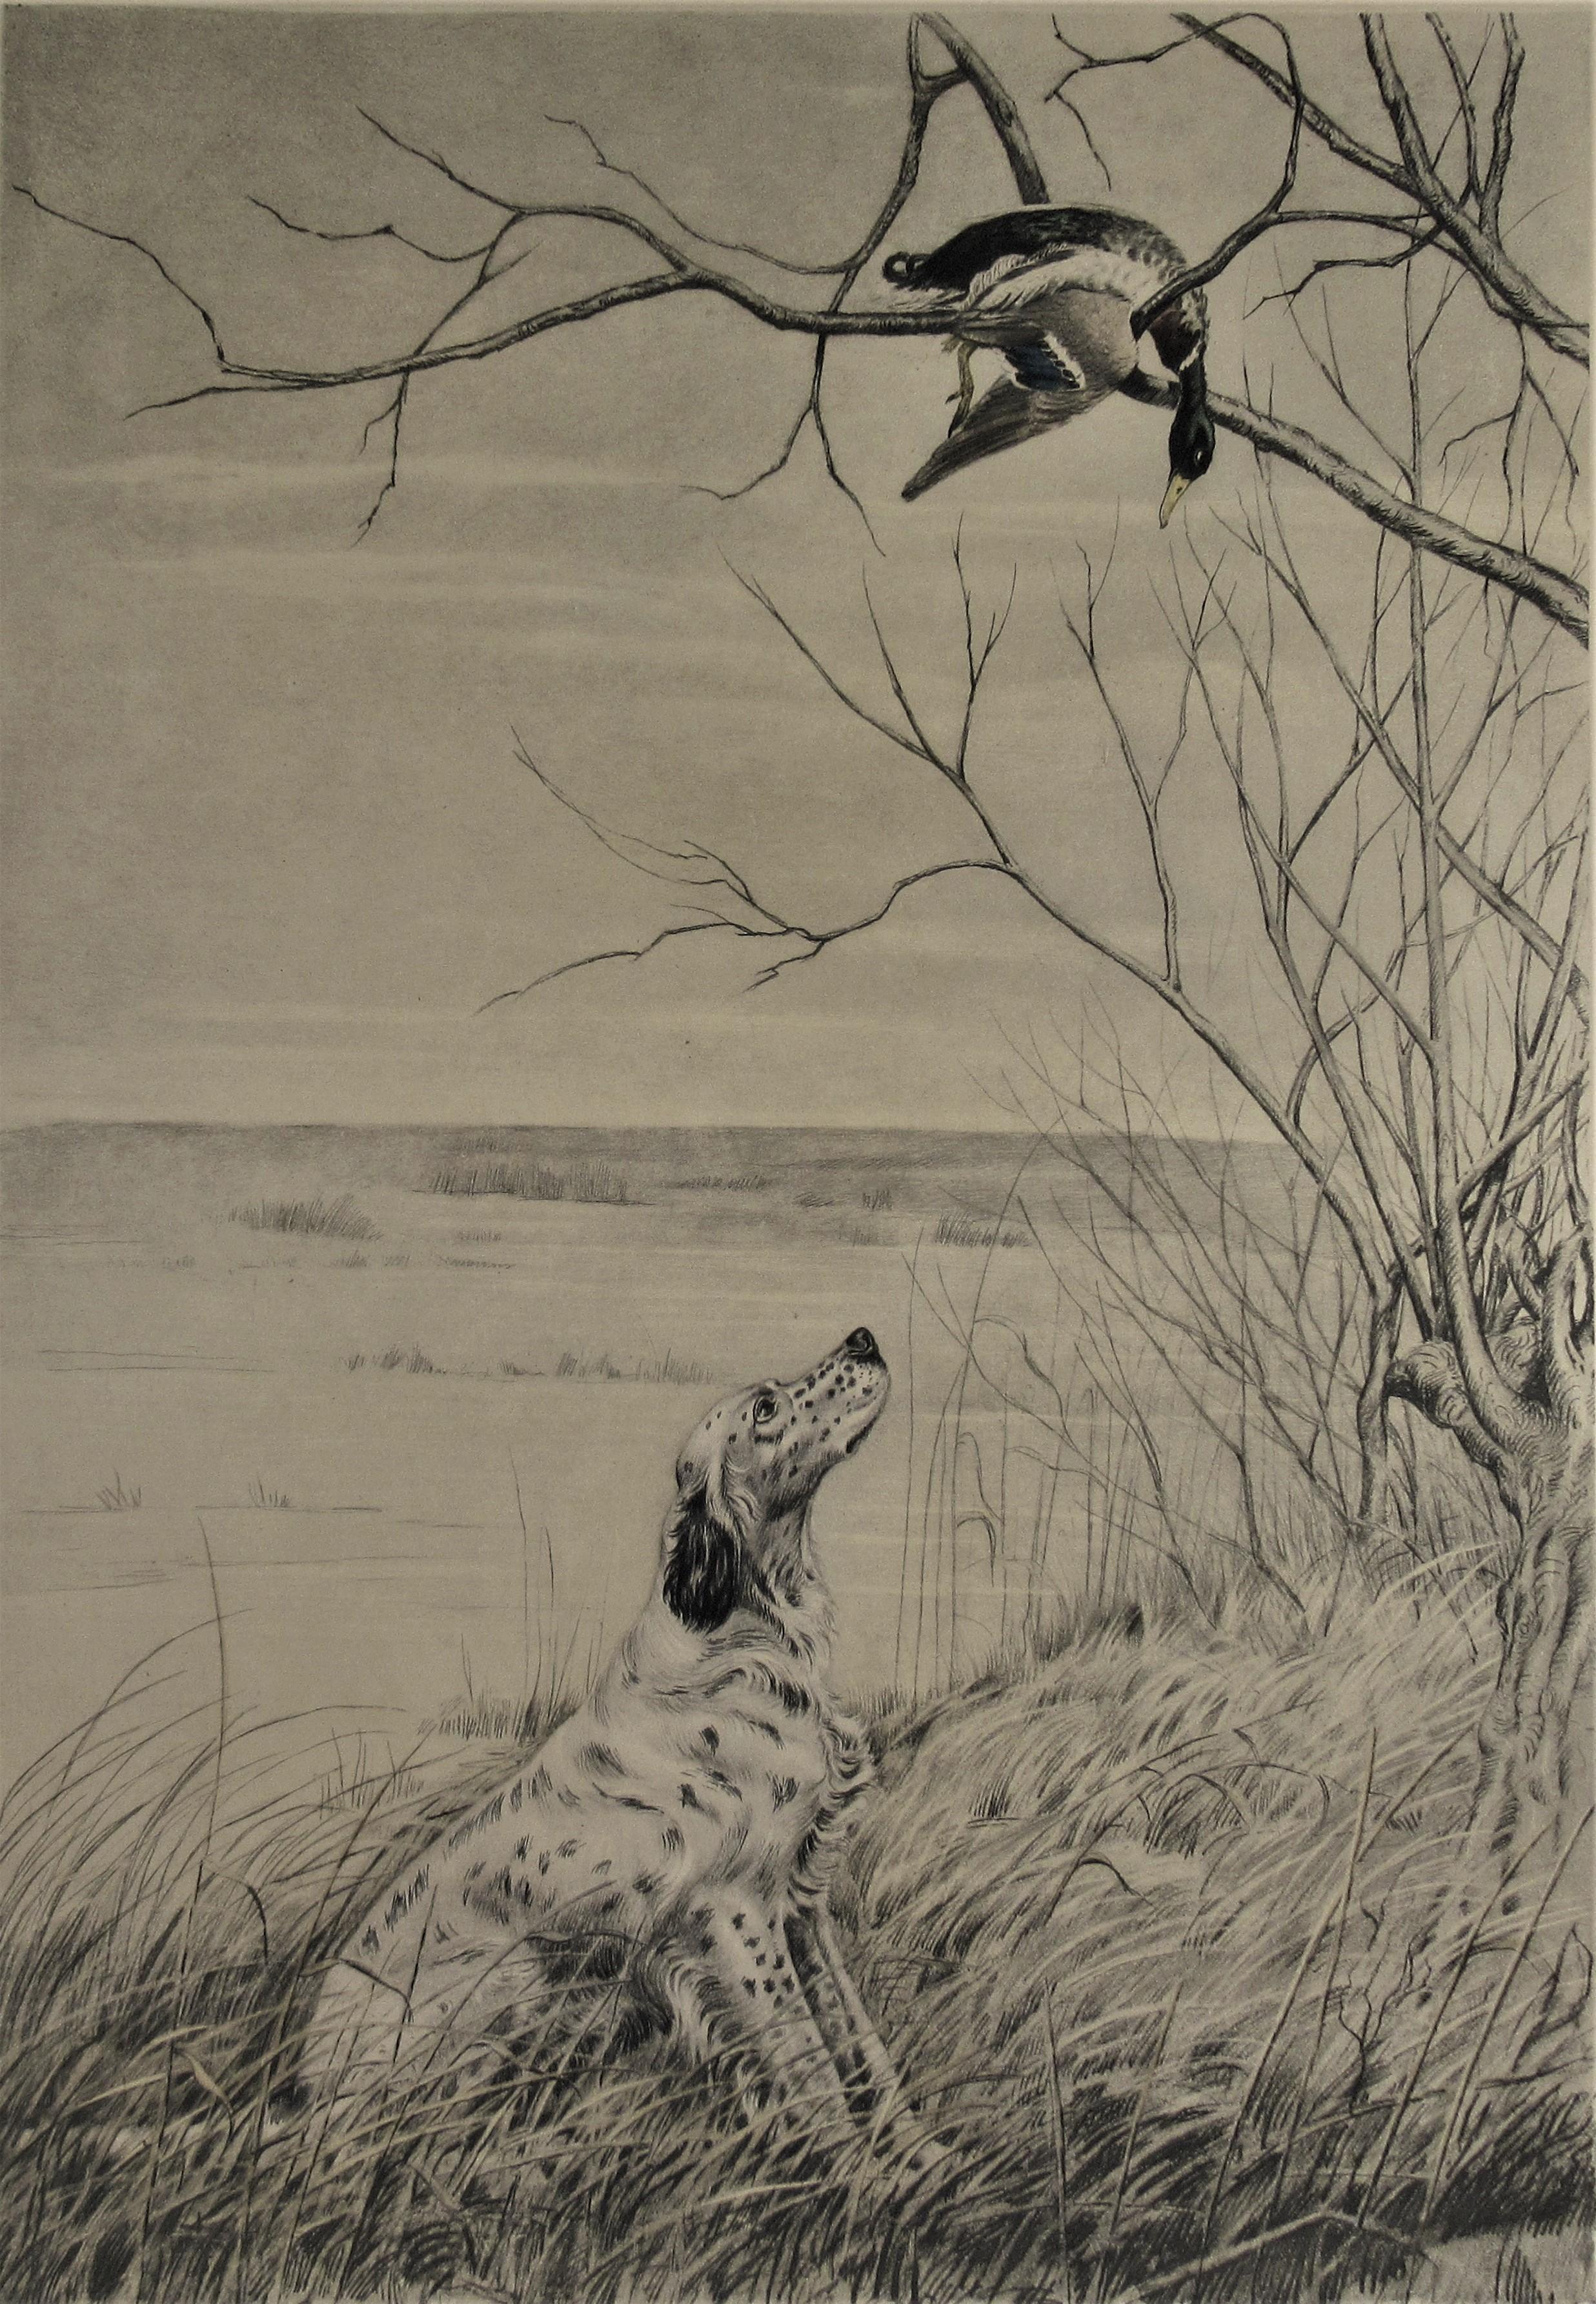 Hunting Dog Looking at a Duck - Print by Leon Danchin